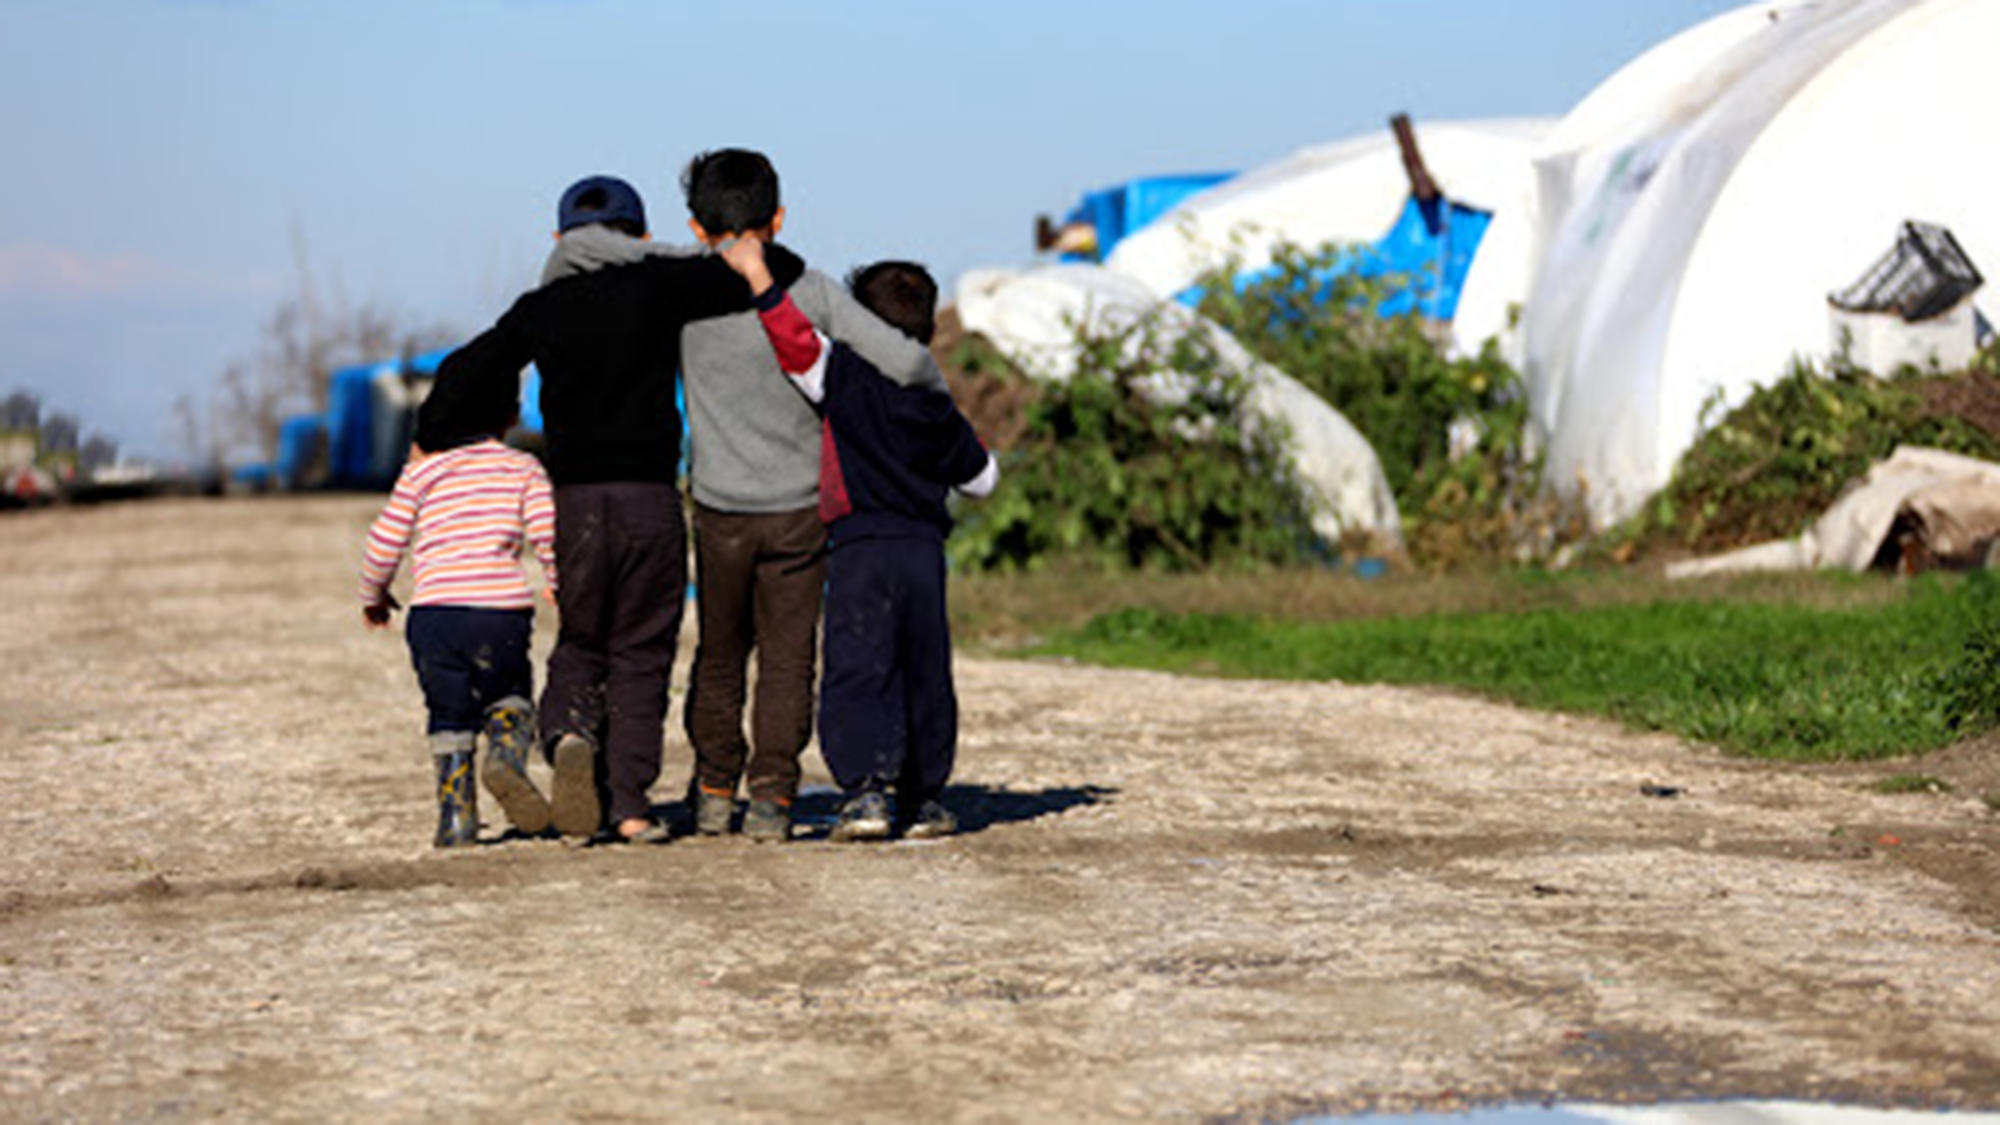 Four refugee children walking on a dirt road near tents